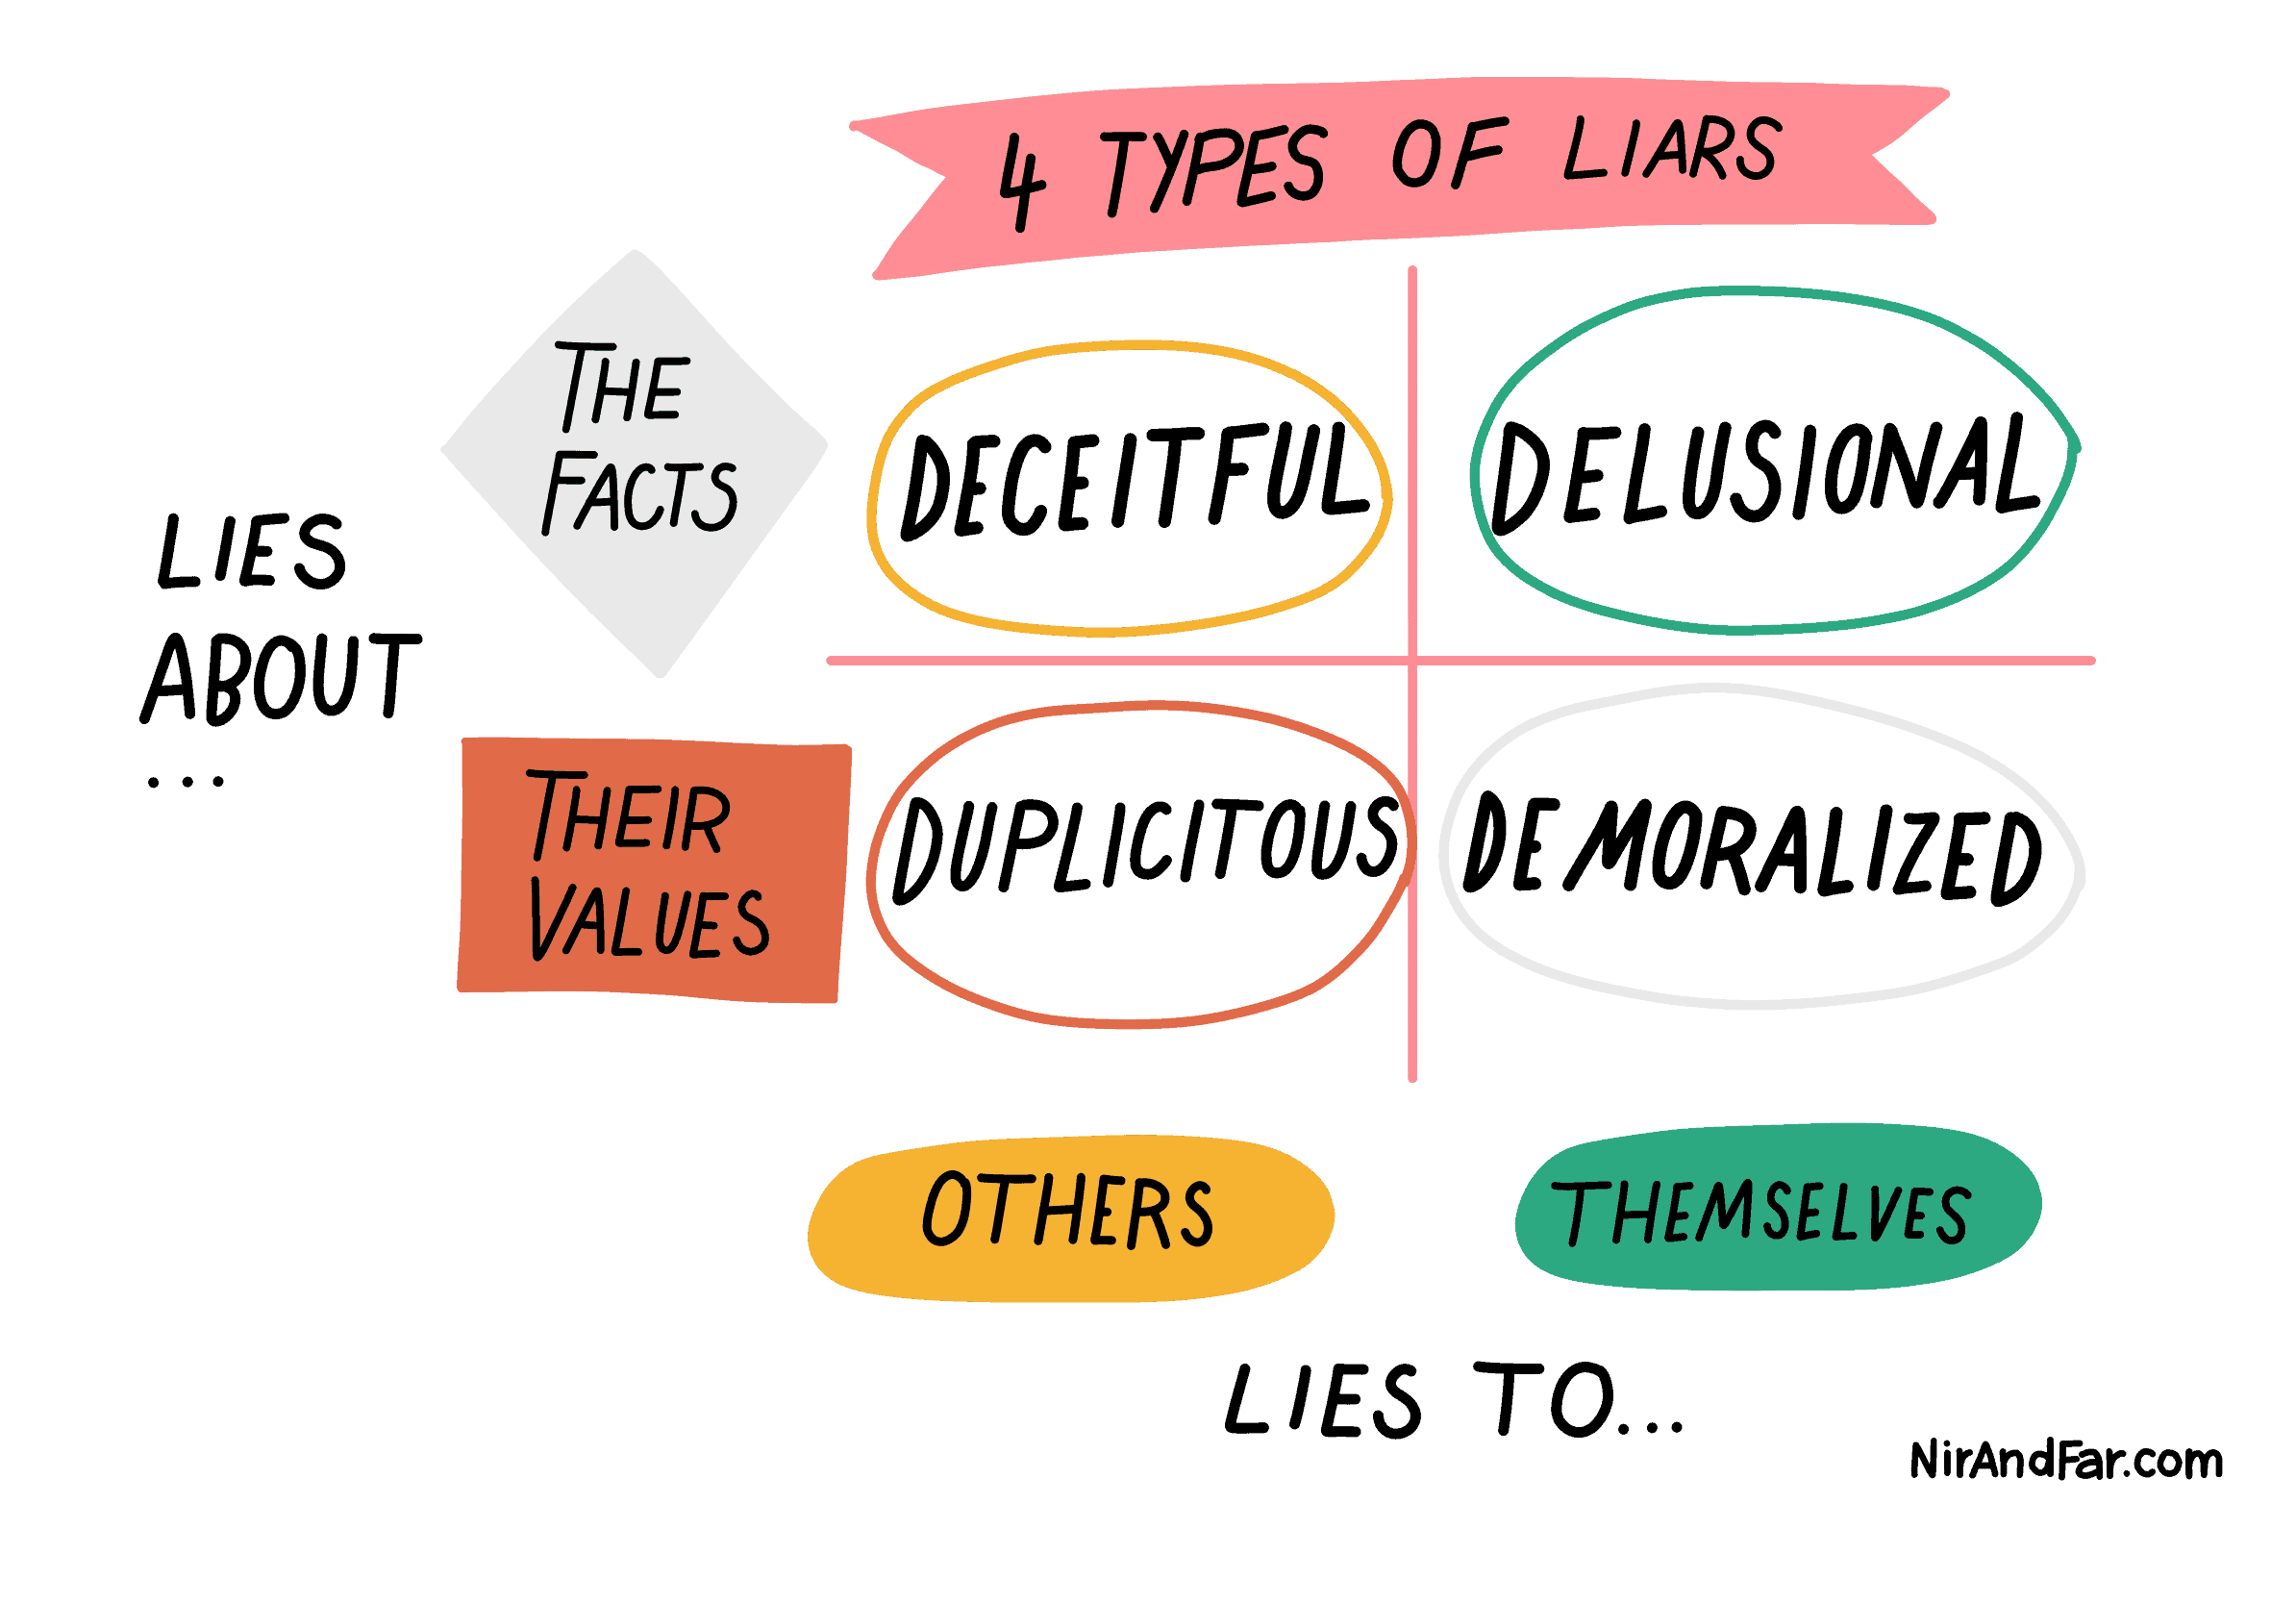 people telling lies quotes